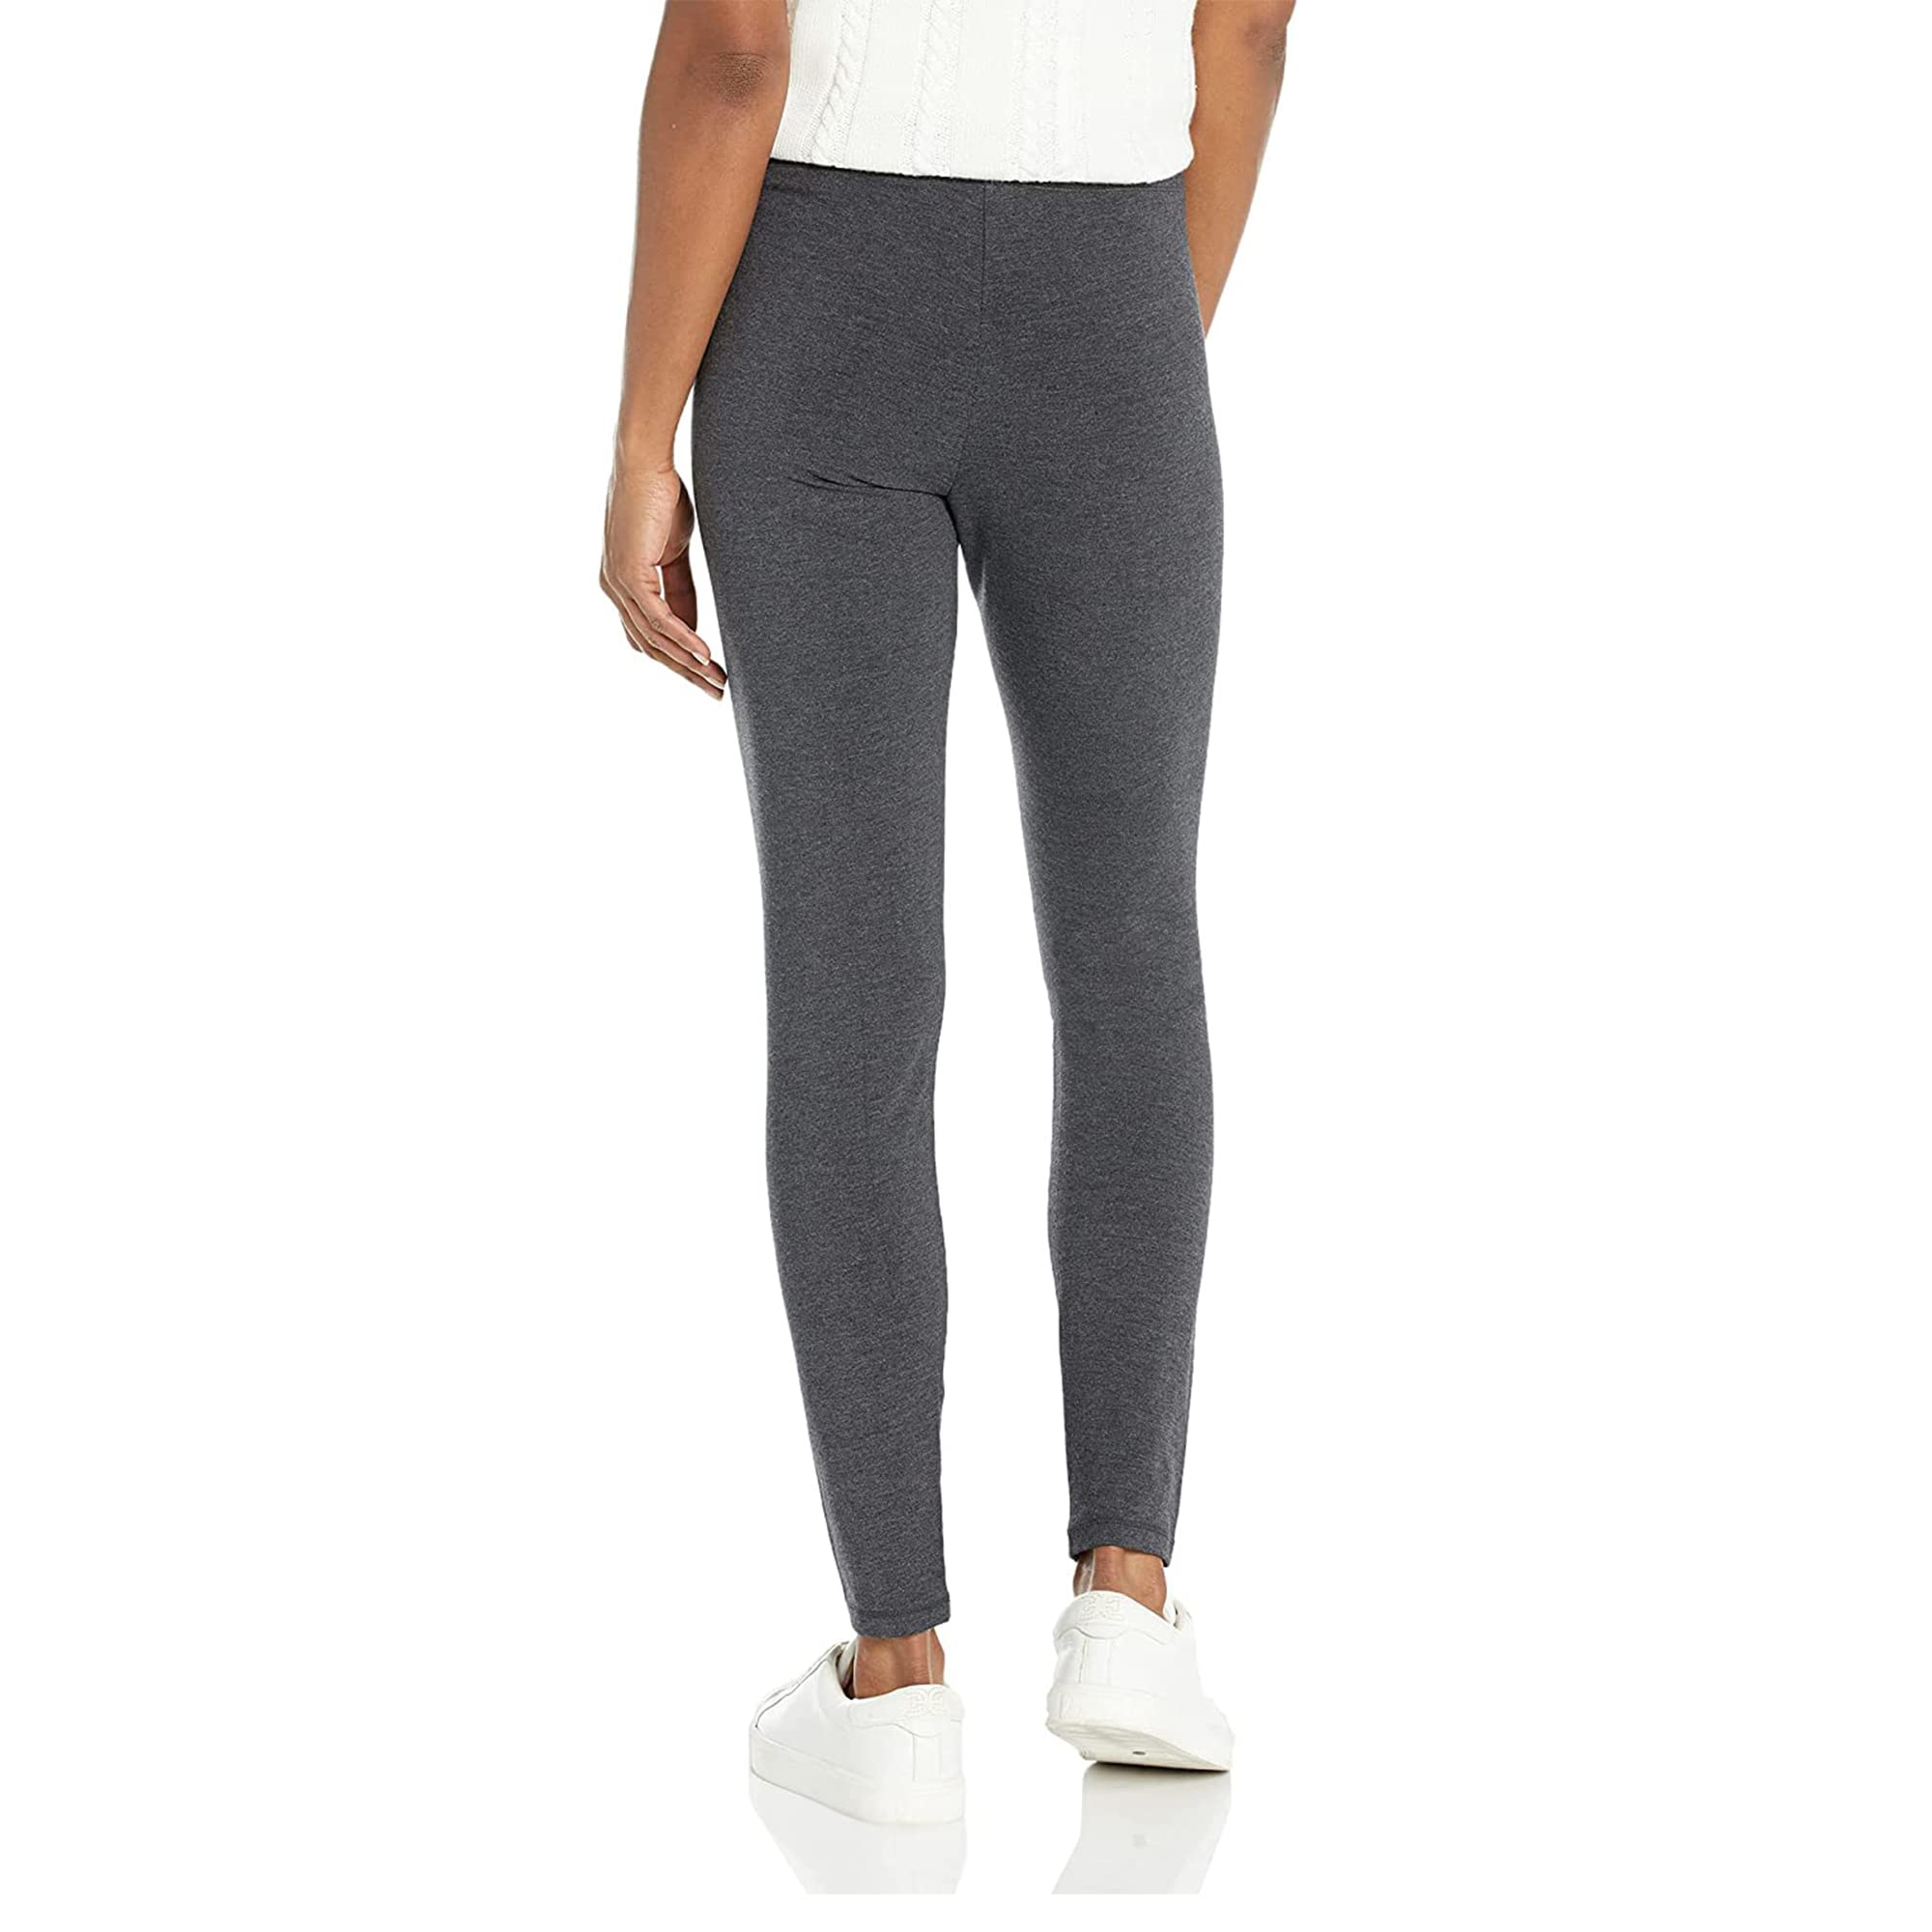 Hue Women's Ultra Legging with Wide Waistband - X-Small - Graphite Heather